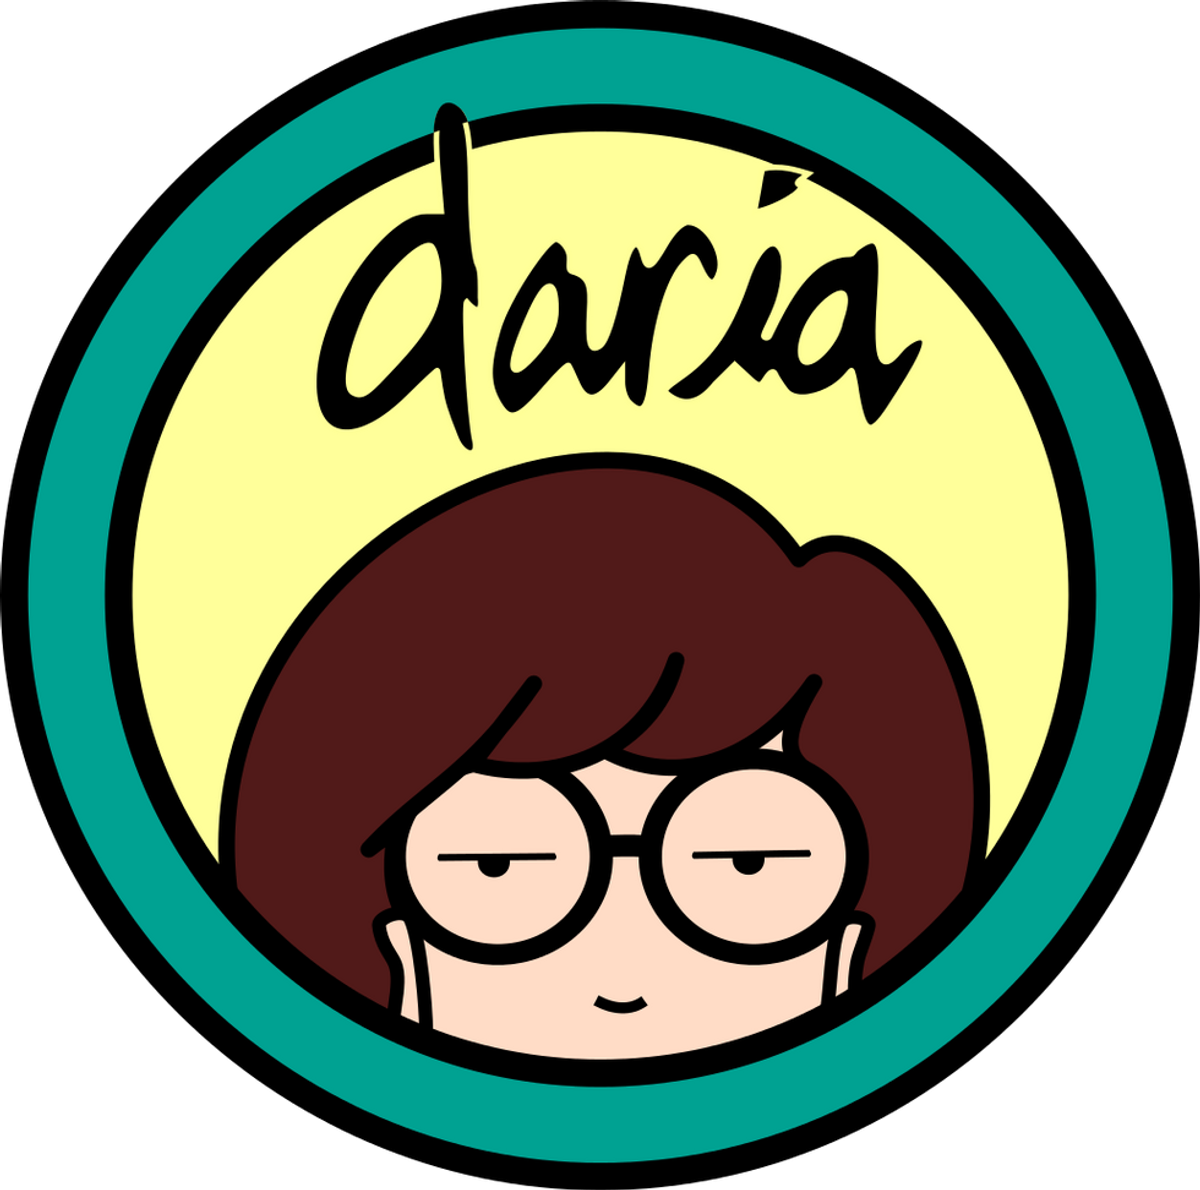 Going Back To School As Told By Daria